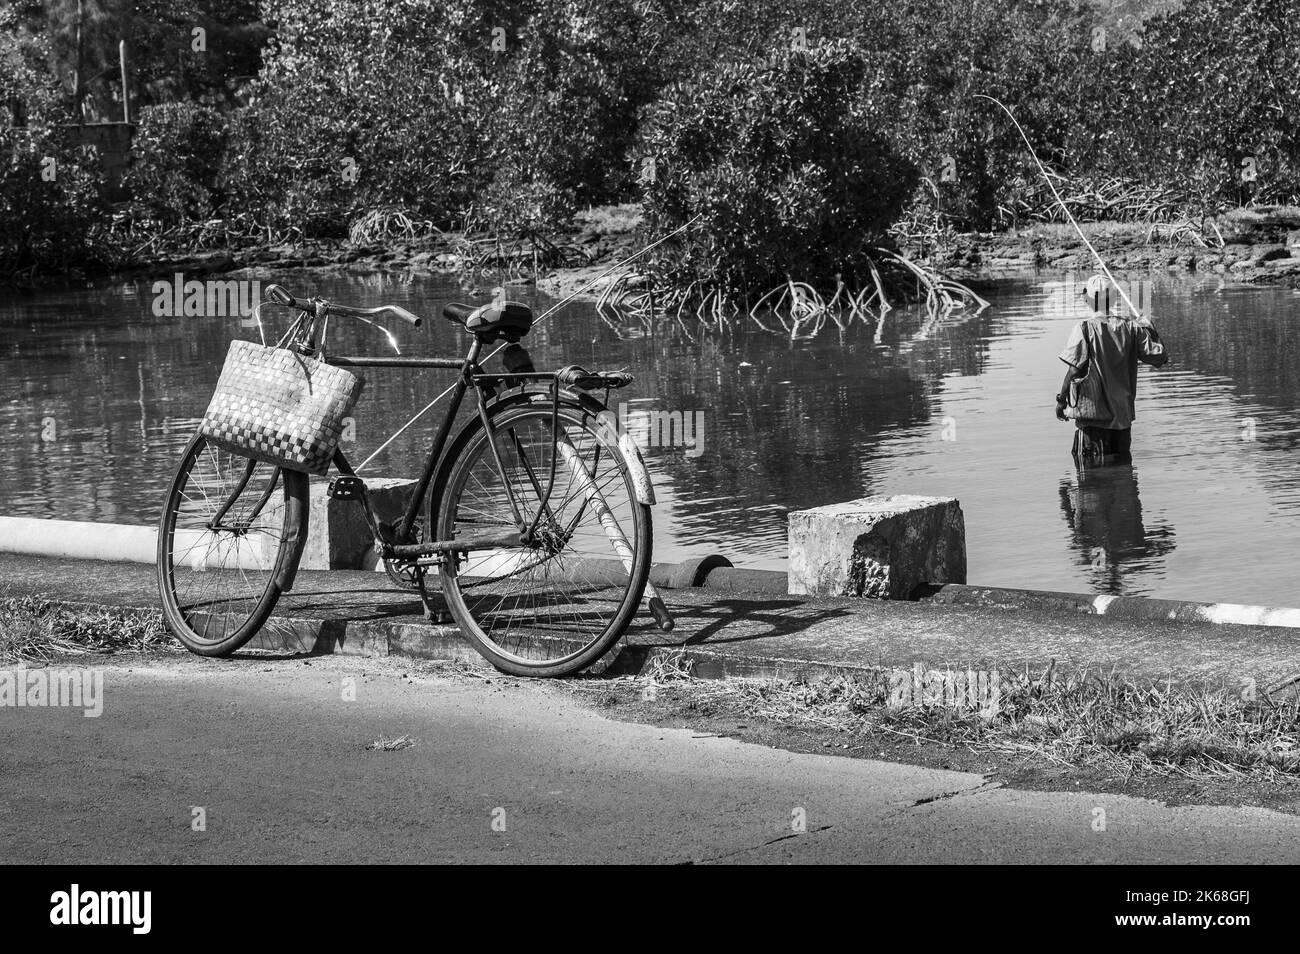 Parked bicycle with a man river fishing near Mahebourg, Mauritius Stock Photo